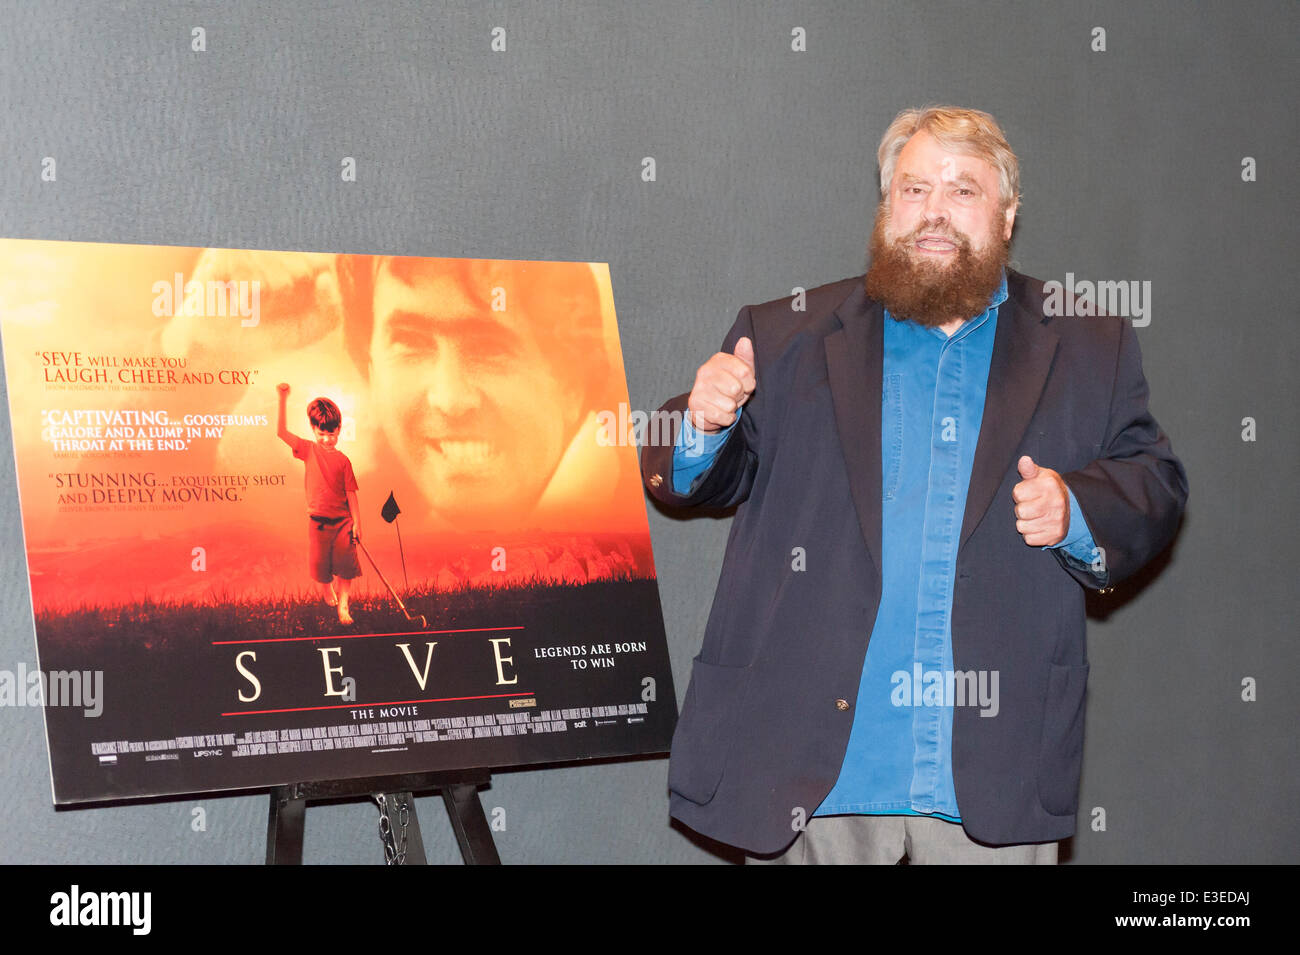 Empire Cinema, Leicester Square, London, UK. 23rd June 2014. Cast and celebrities attend the movie premiere “Seve” which opened at the Empire Cinema in Leicester Square, London. The motion picture tells the story of Seve Ballesteros who fought against adversity to become one of the most spectacular and charismatic golfers to ever play the game. Pictured: BRIAN BLESSED Credit:  Lee Thomas/Alamy Live News Stock Photo